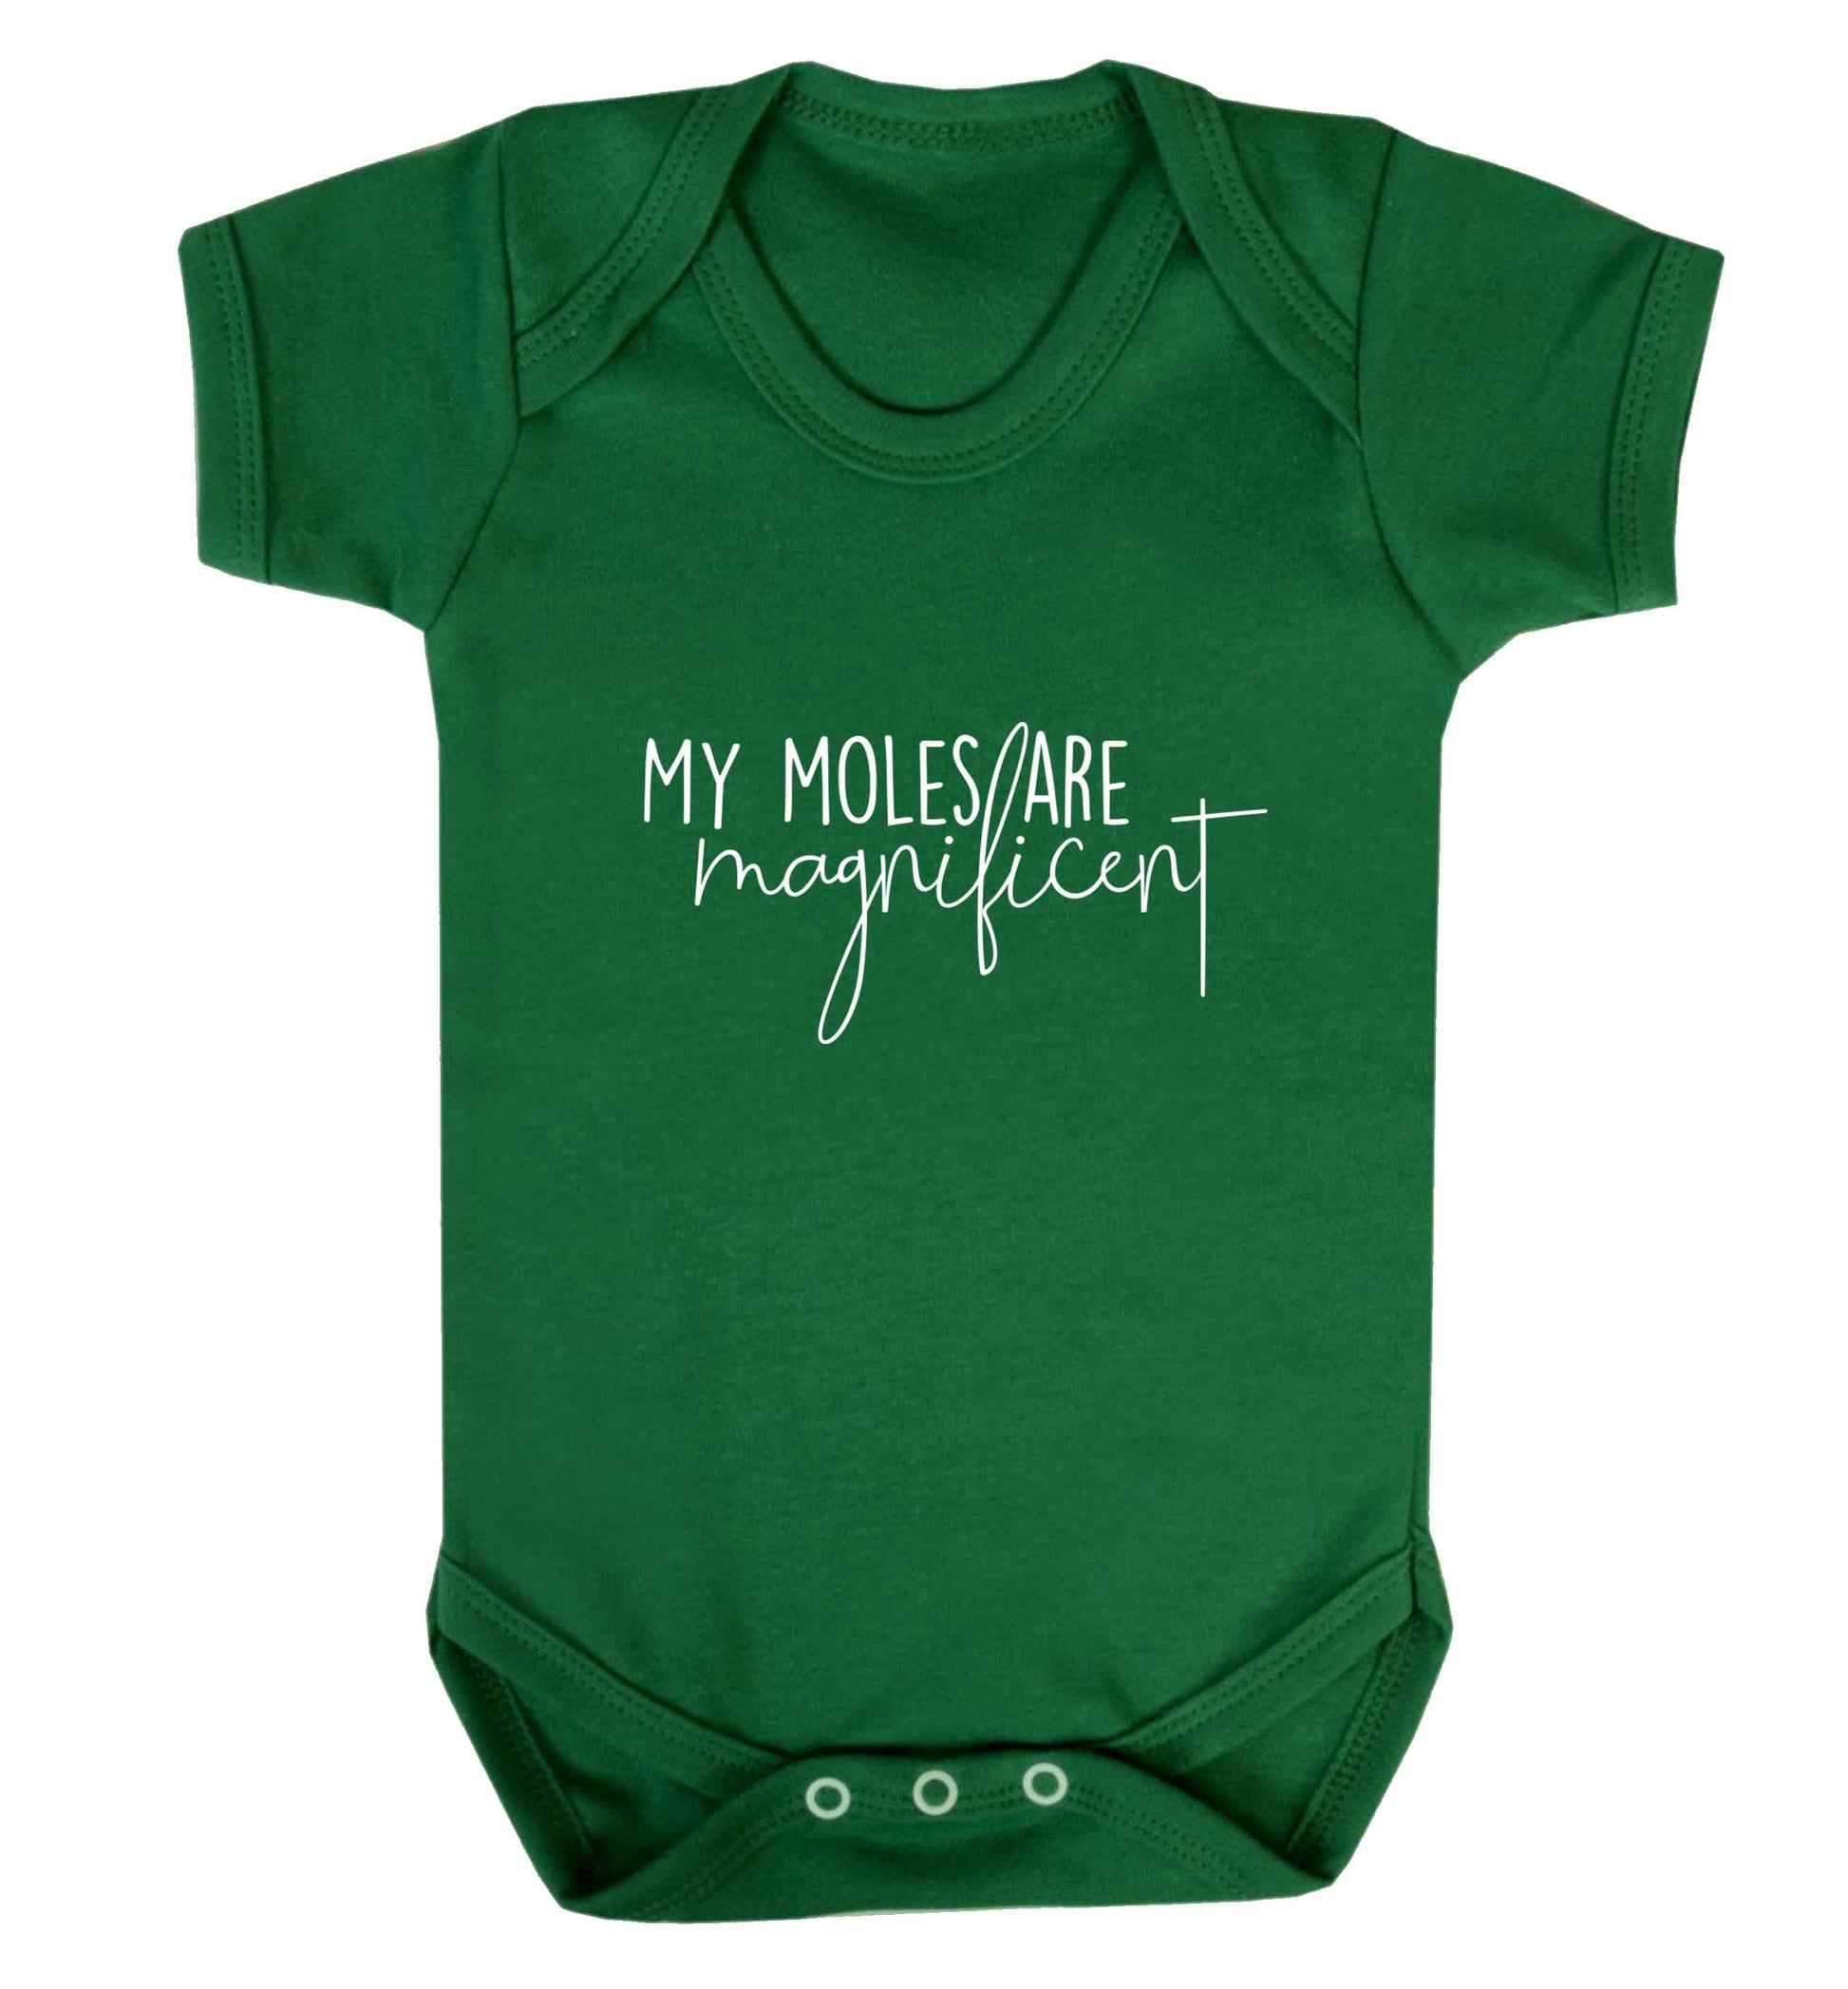 My moles are magnificent baby vest green 18-24 months